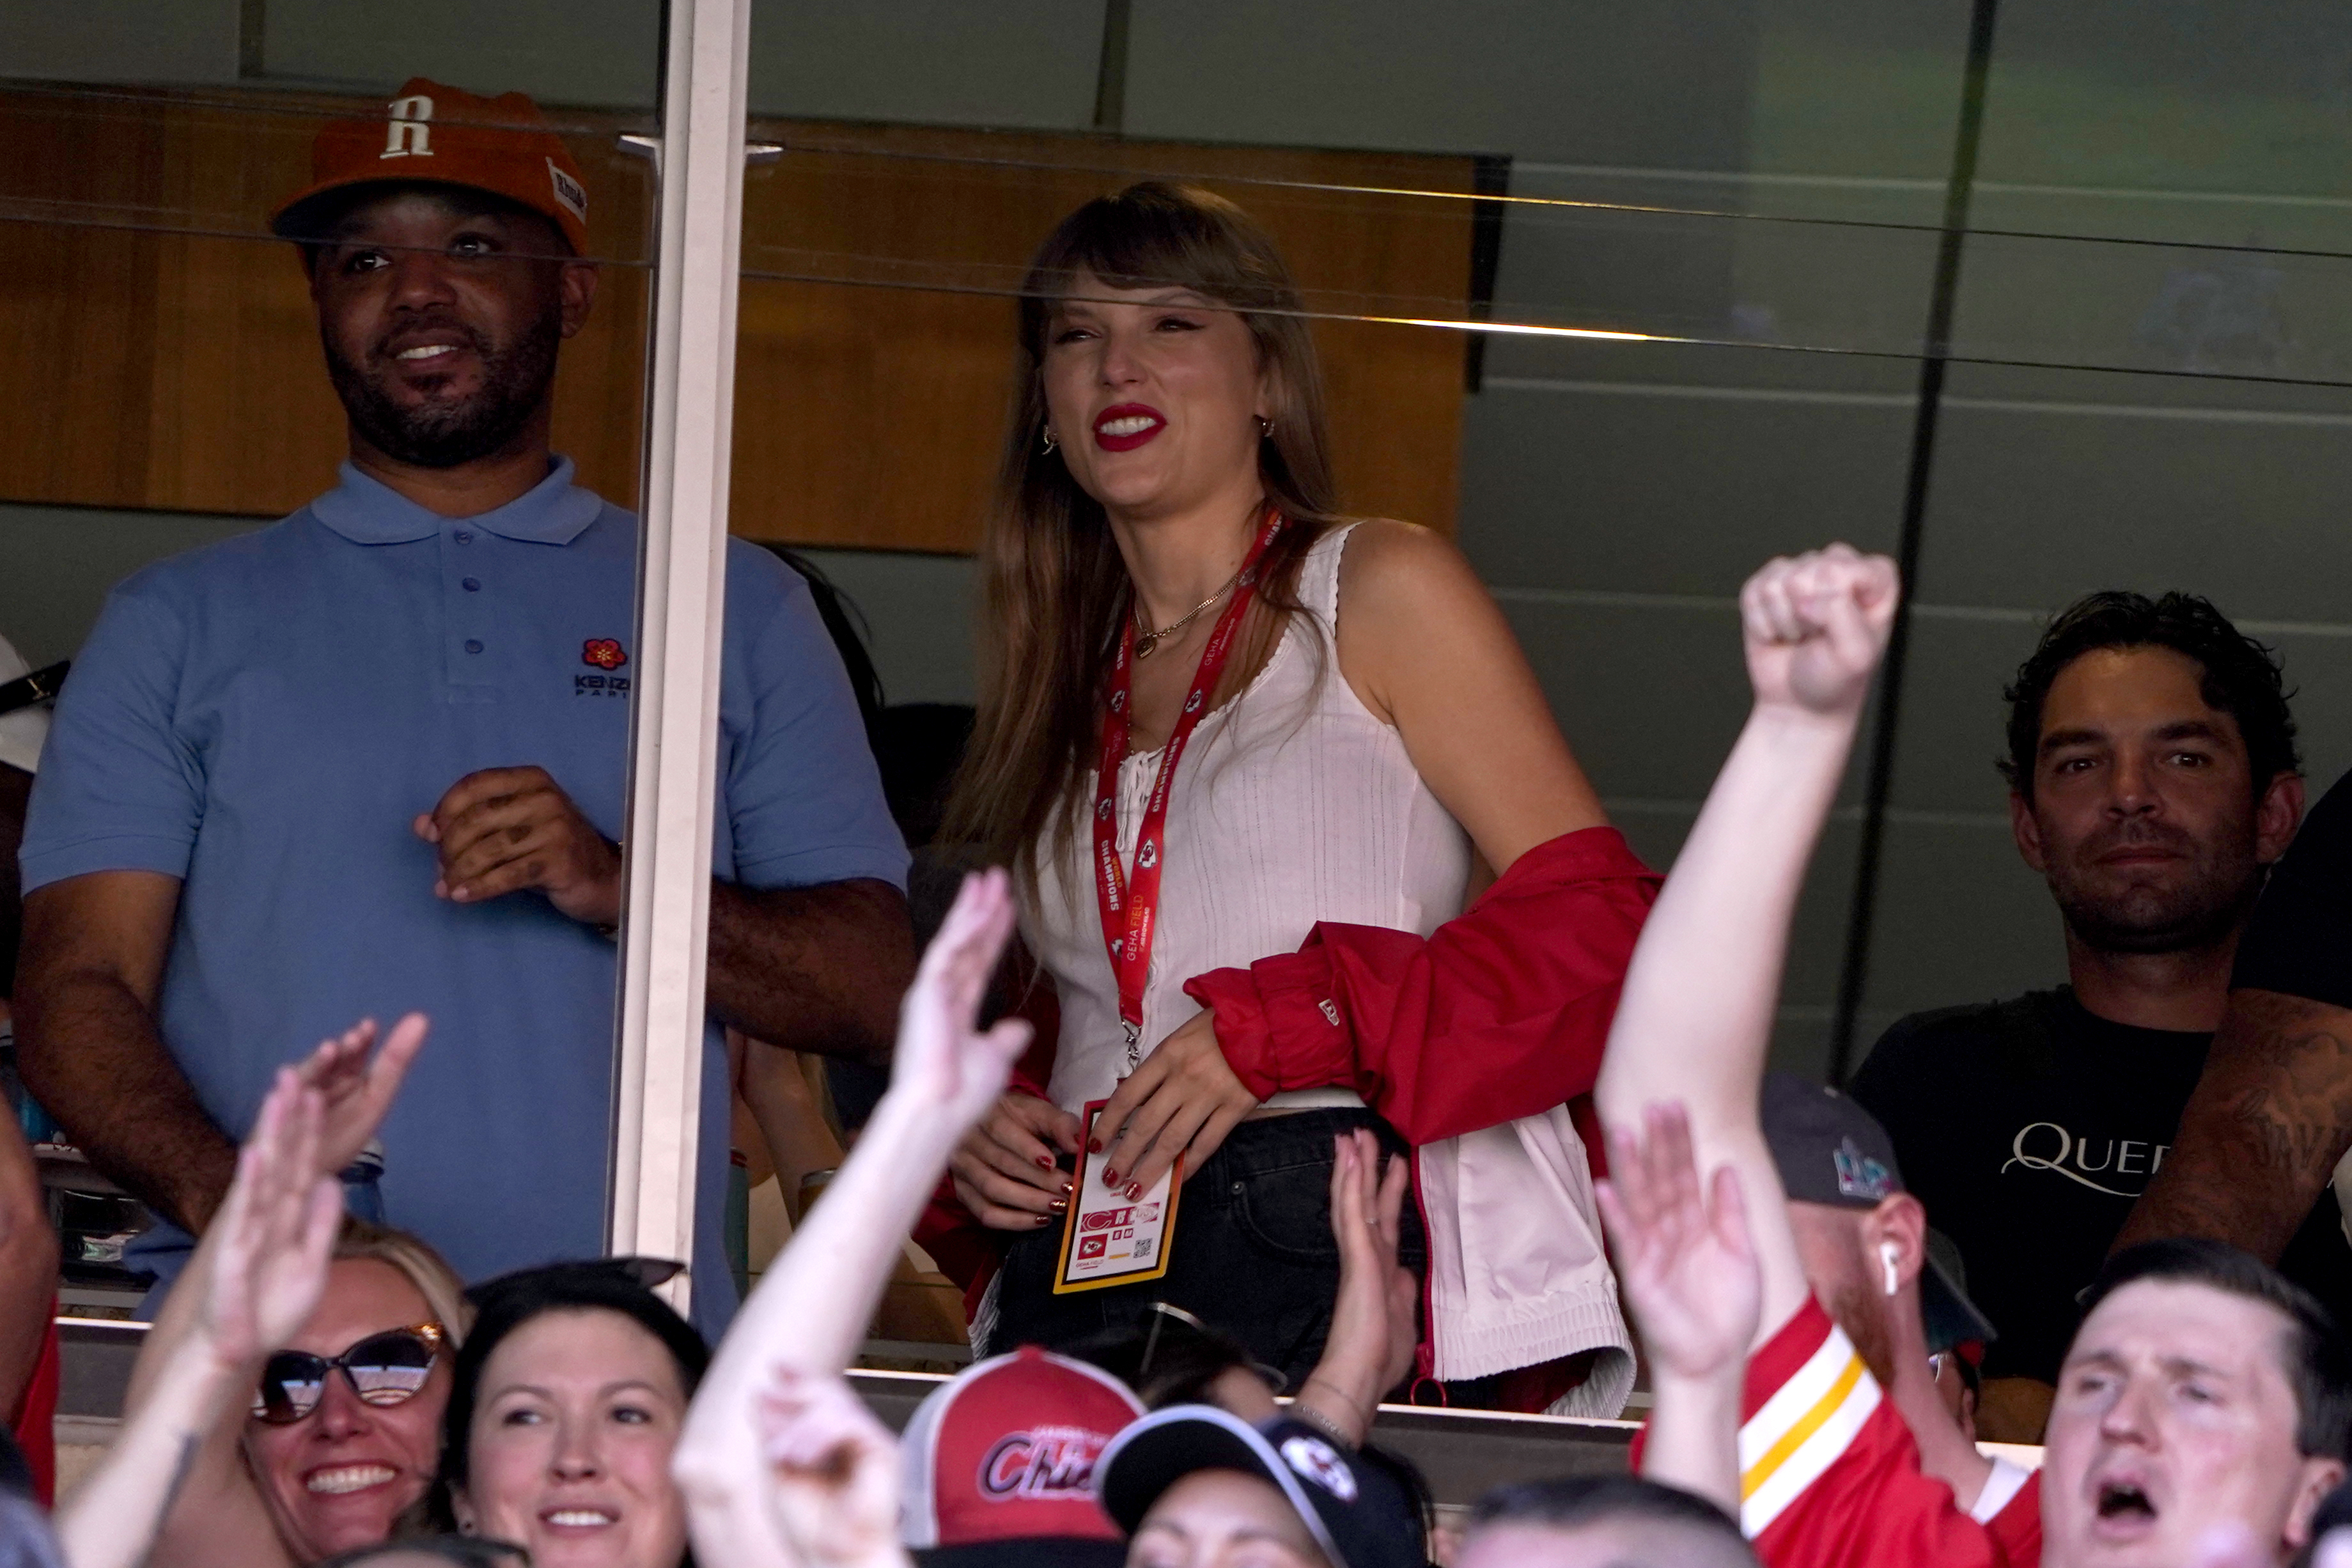 Taylor Swift fans tailgate Chiefs-Jets game at MetLife: Photos